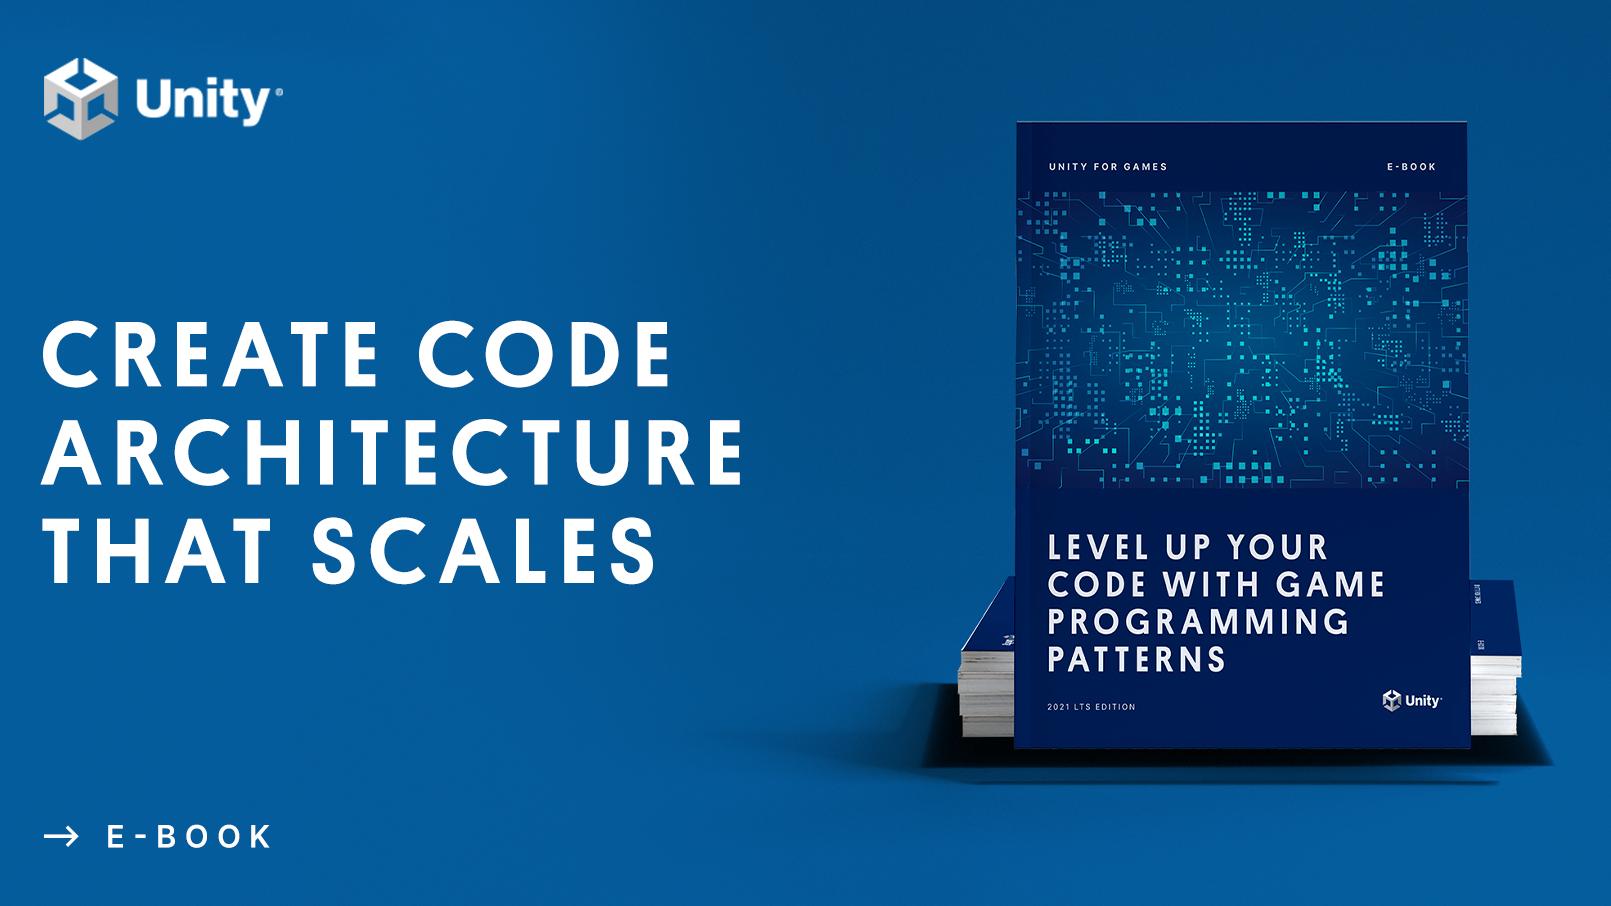 Create code architecture that scales | e-book promotional image